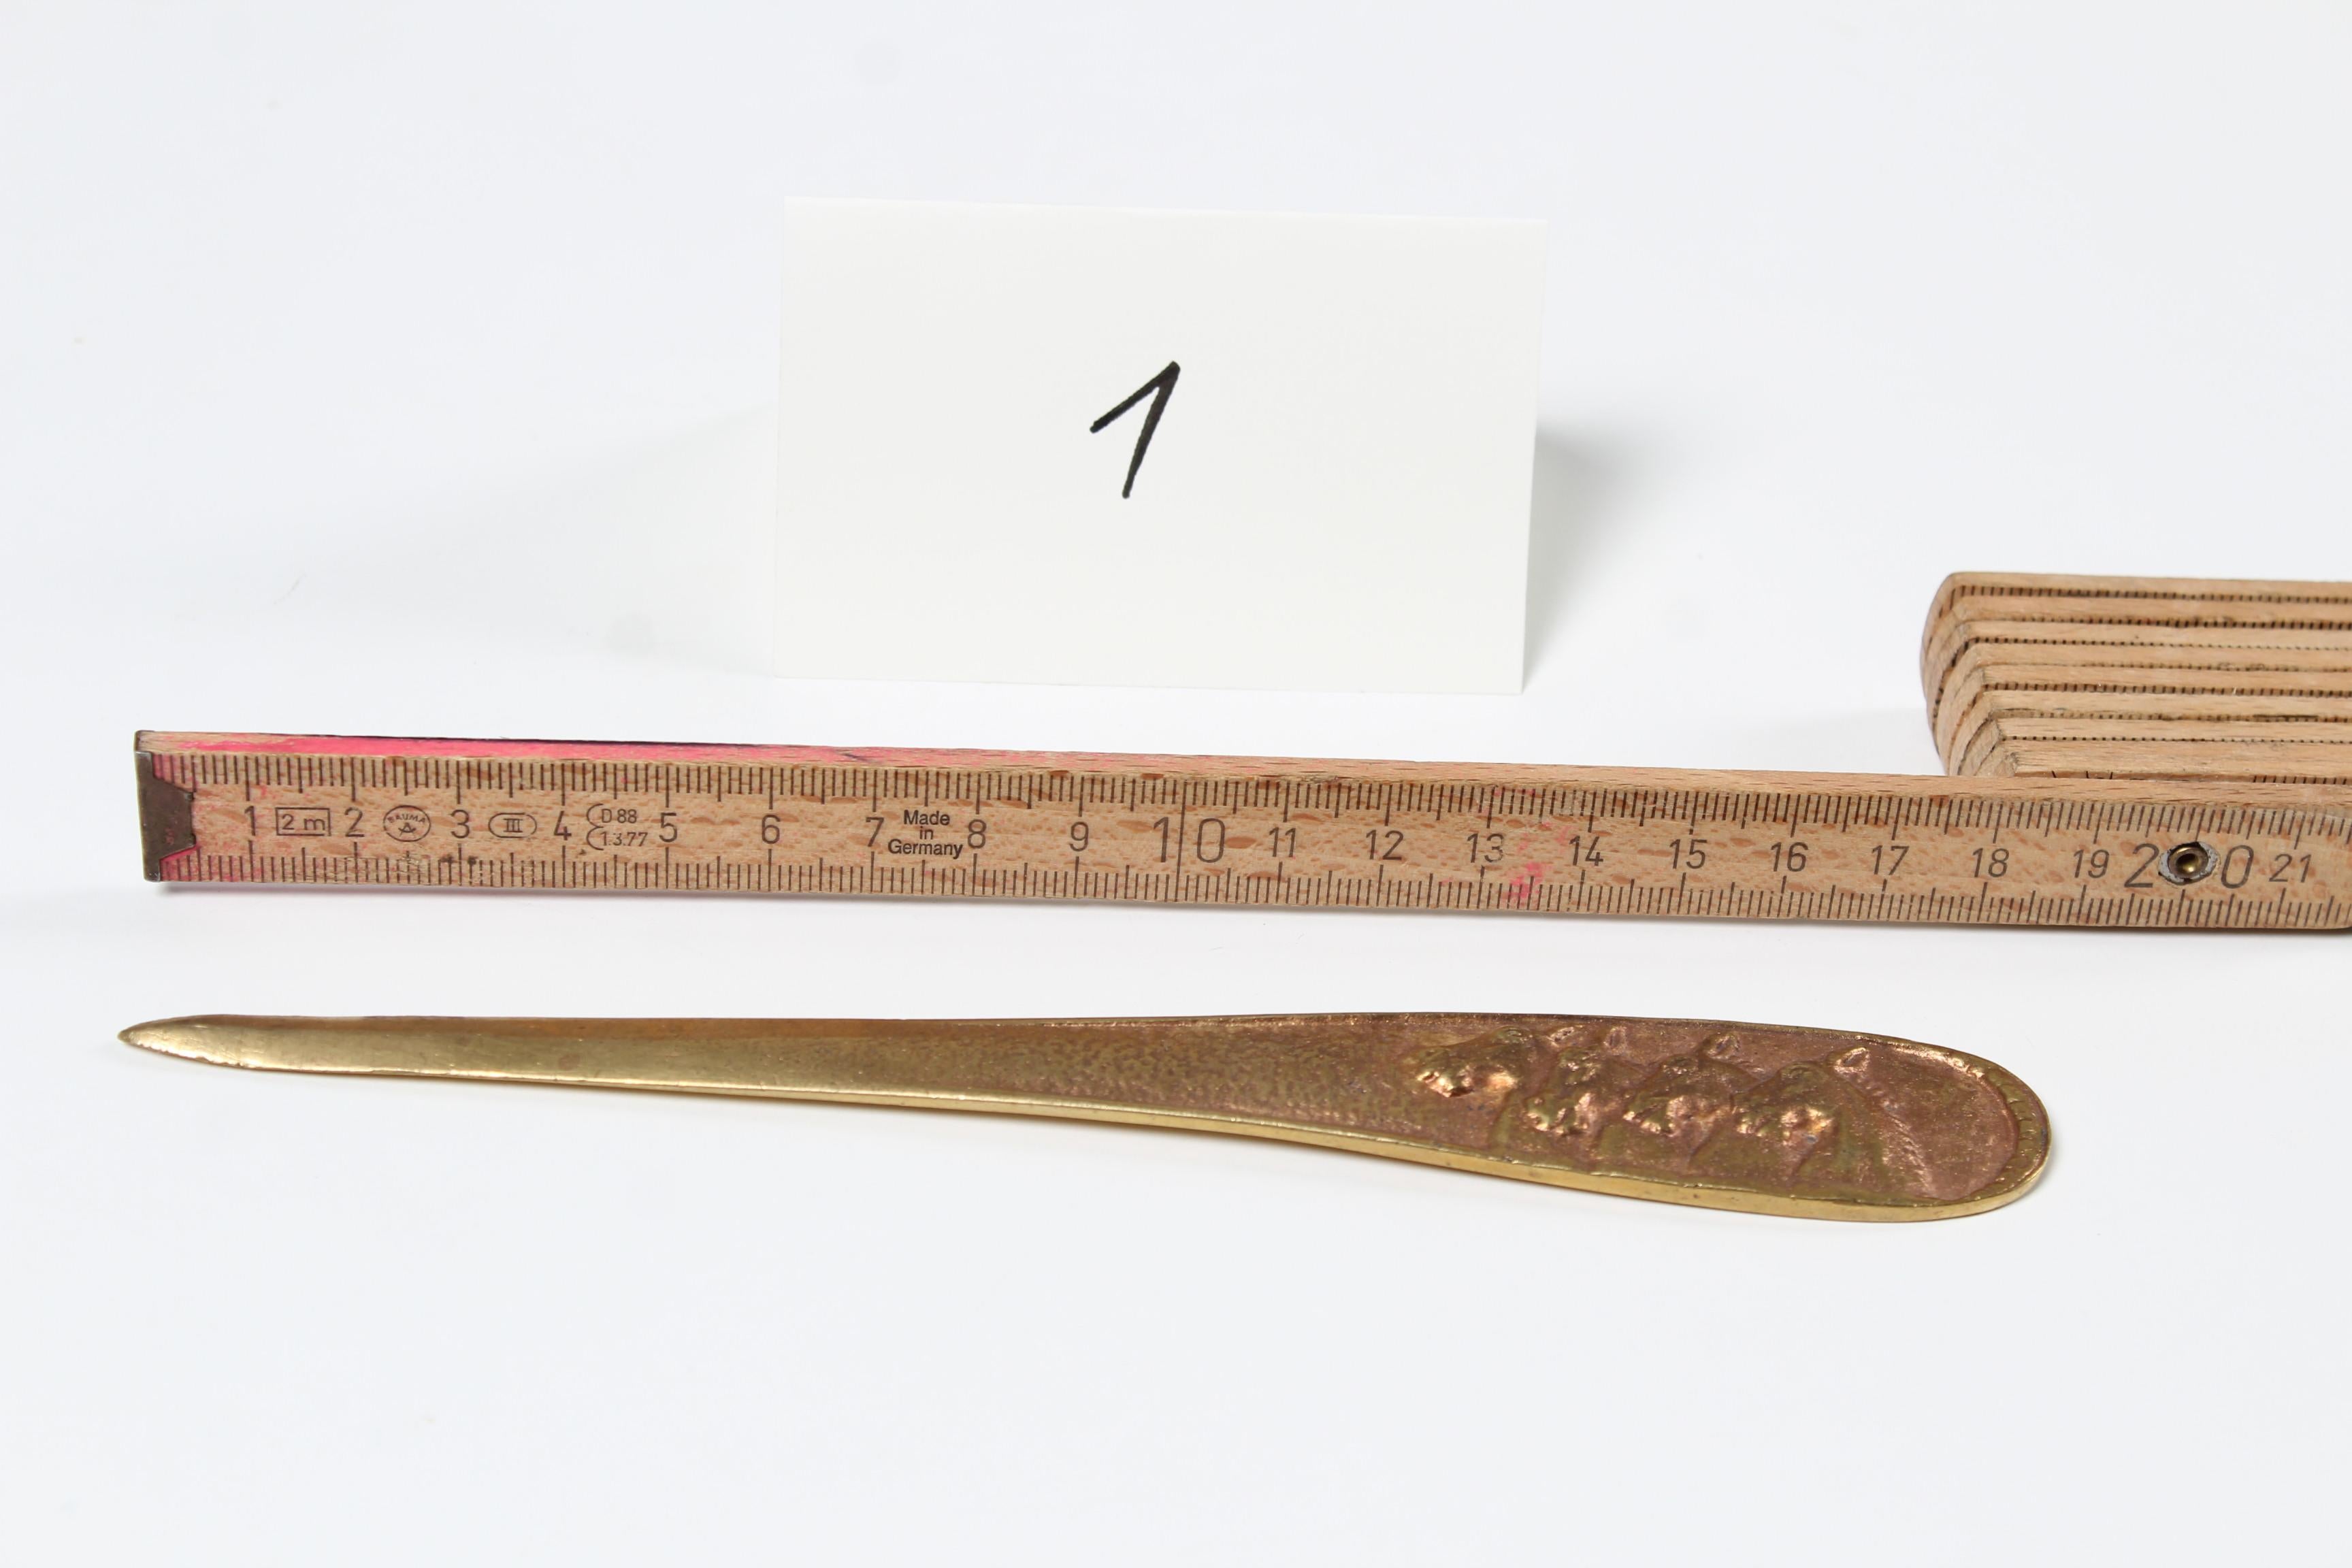 Antique Letter Opener, Max Le Verrier.

So beautiful, very nice condition!